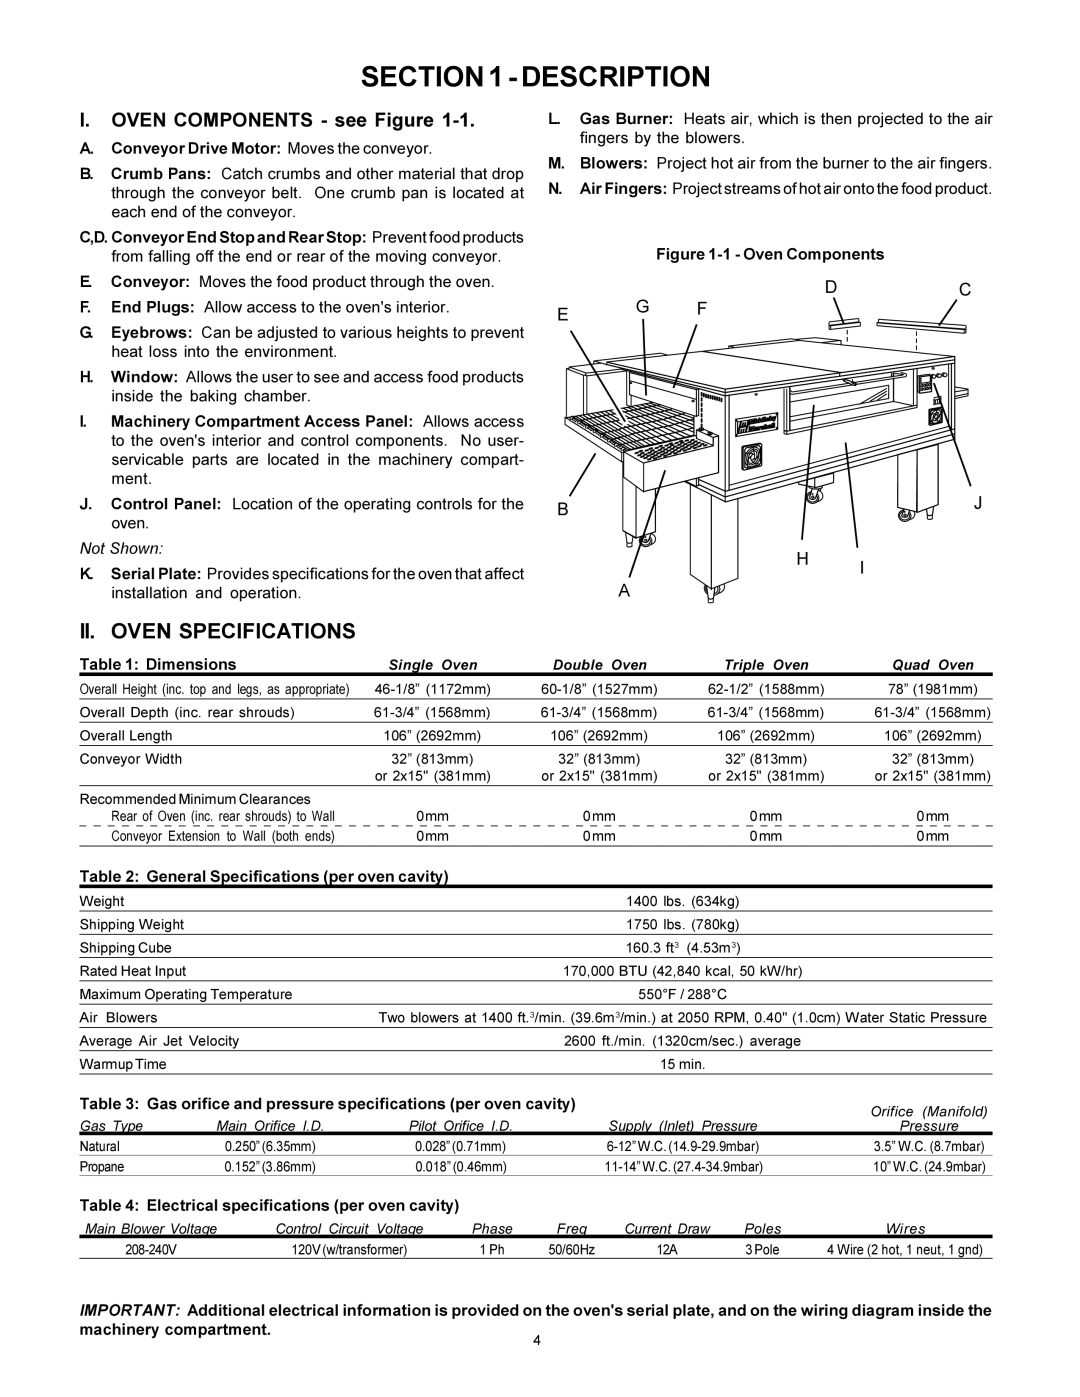 Middleby Marshall PS570S Description, I. OVEN COMPONENTS - see Figure, A. Conveyor Drive Motor Moves the conveyor 